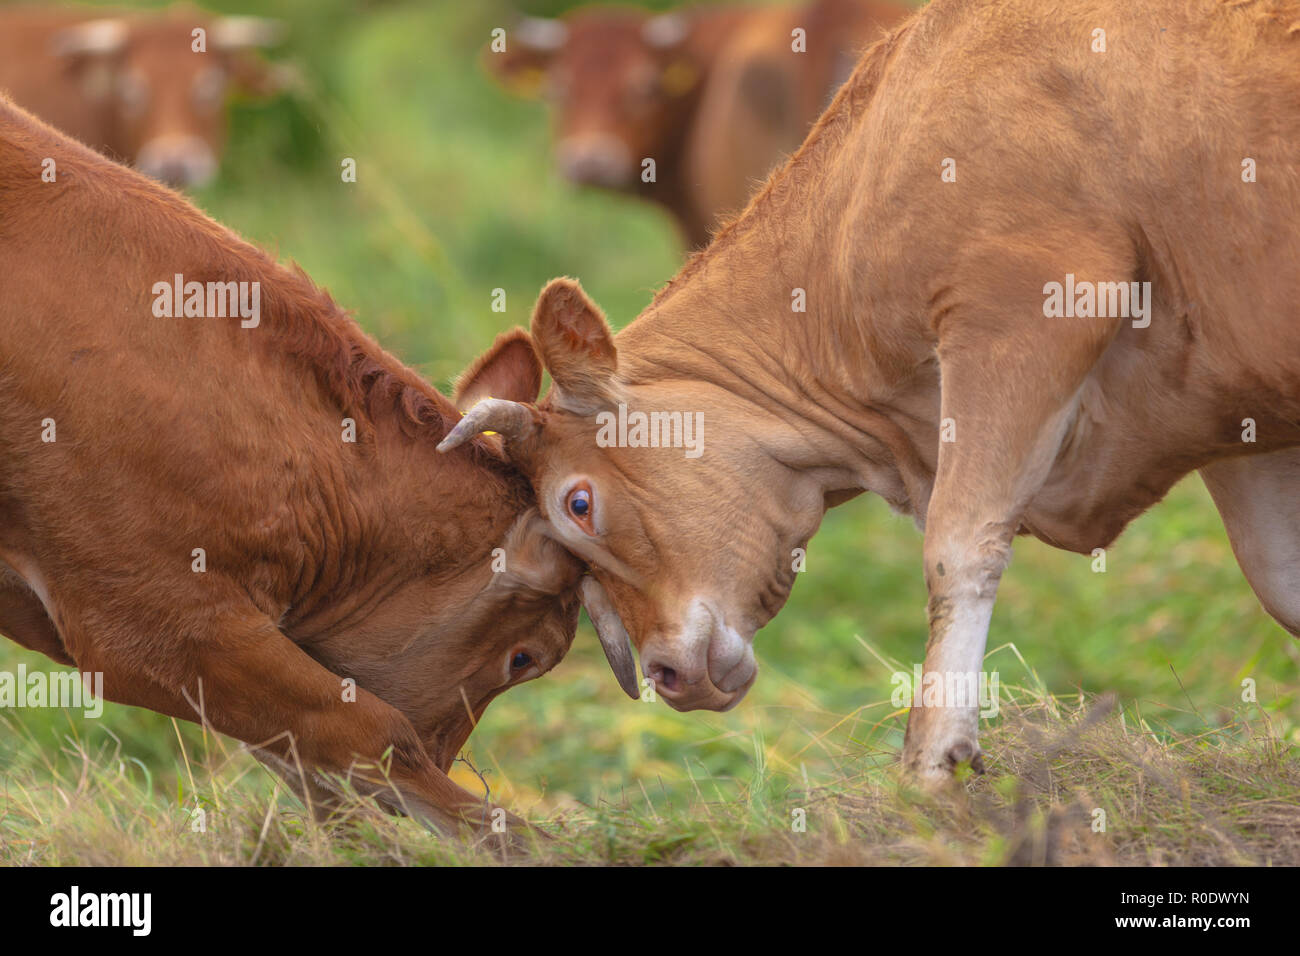 Romping Cows in a Grass Field Stock Photo